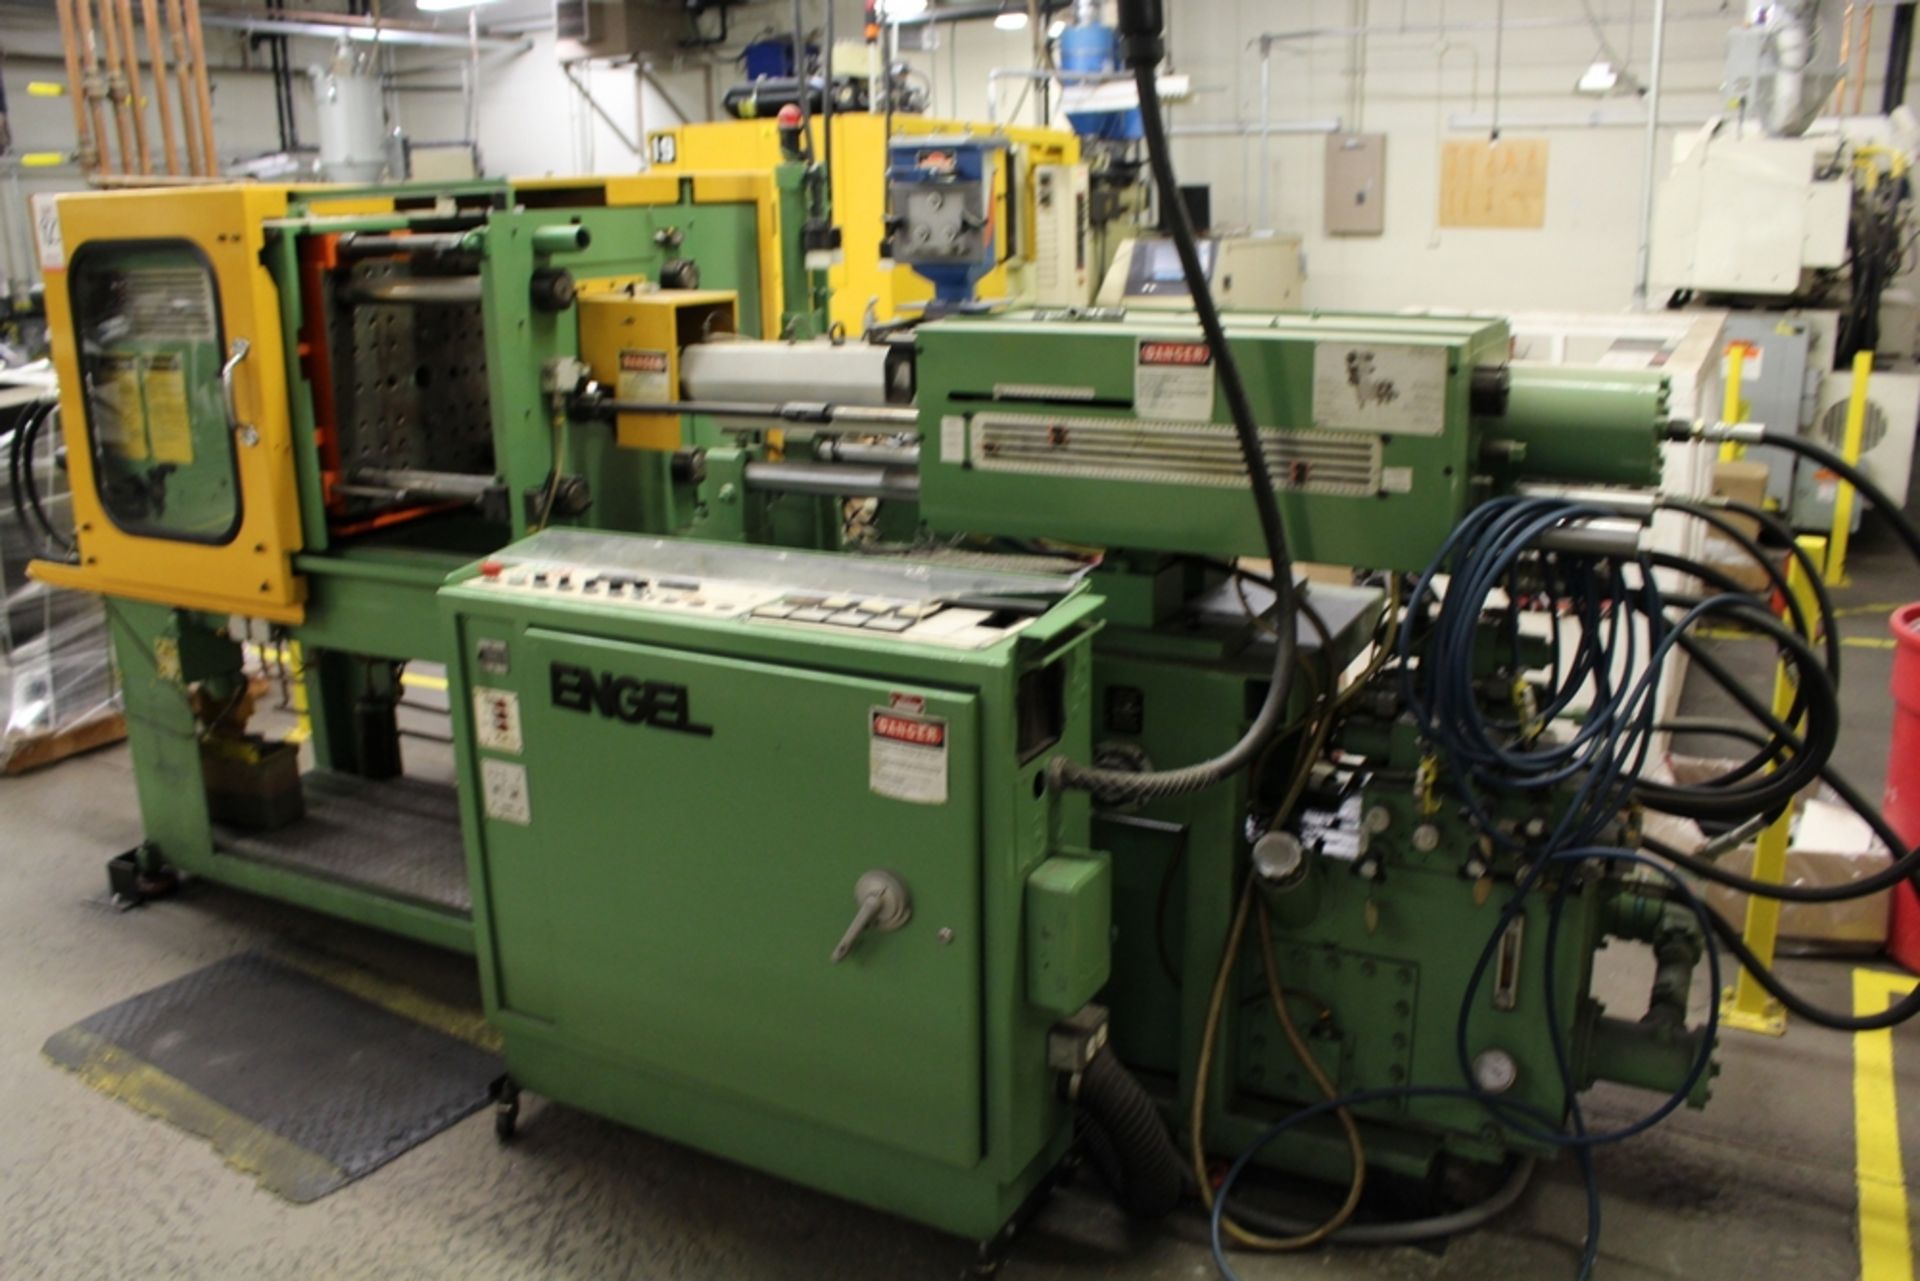 ENGEL 50-TON INJECTION MOLDING MACHINE, S/N 6967-61, #M21 - Image 2 of 5